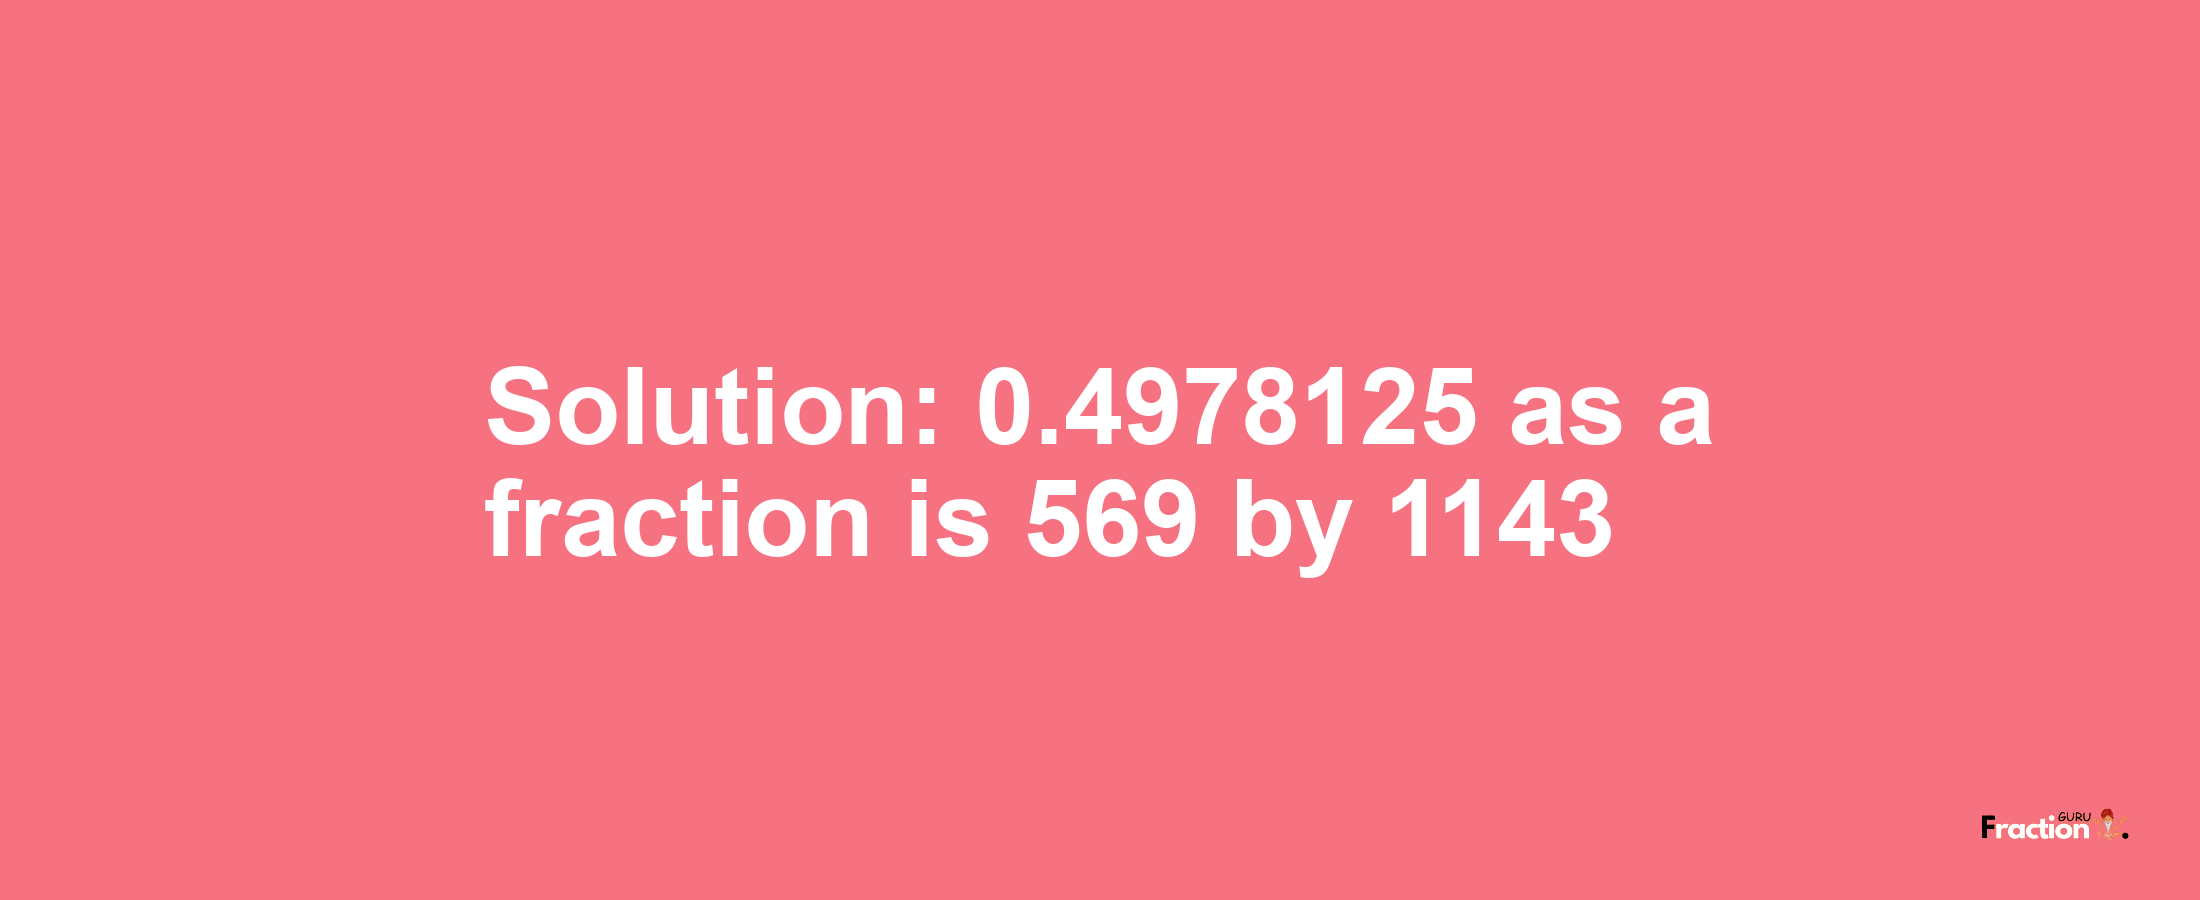 Solution:0.4978125 as a fraction is 569/1143